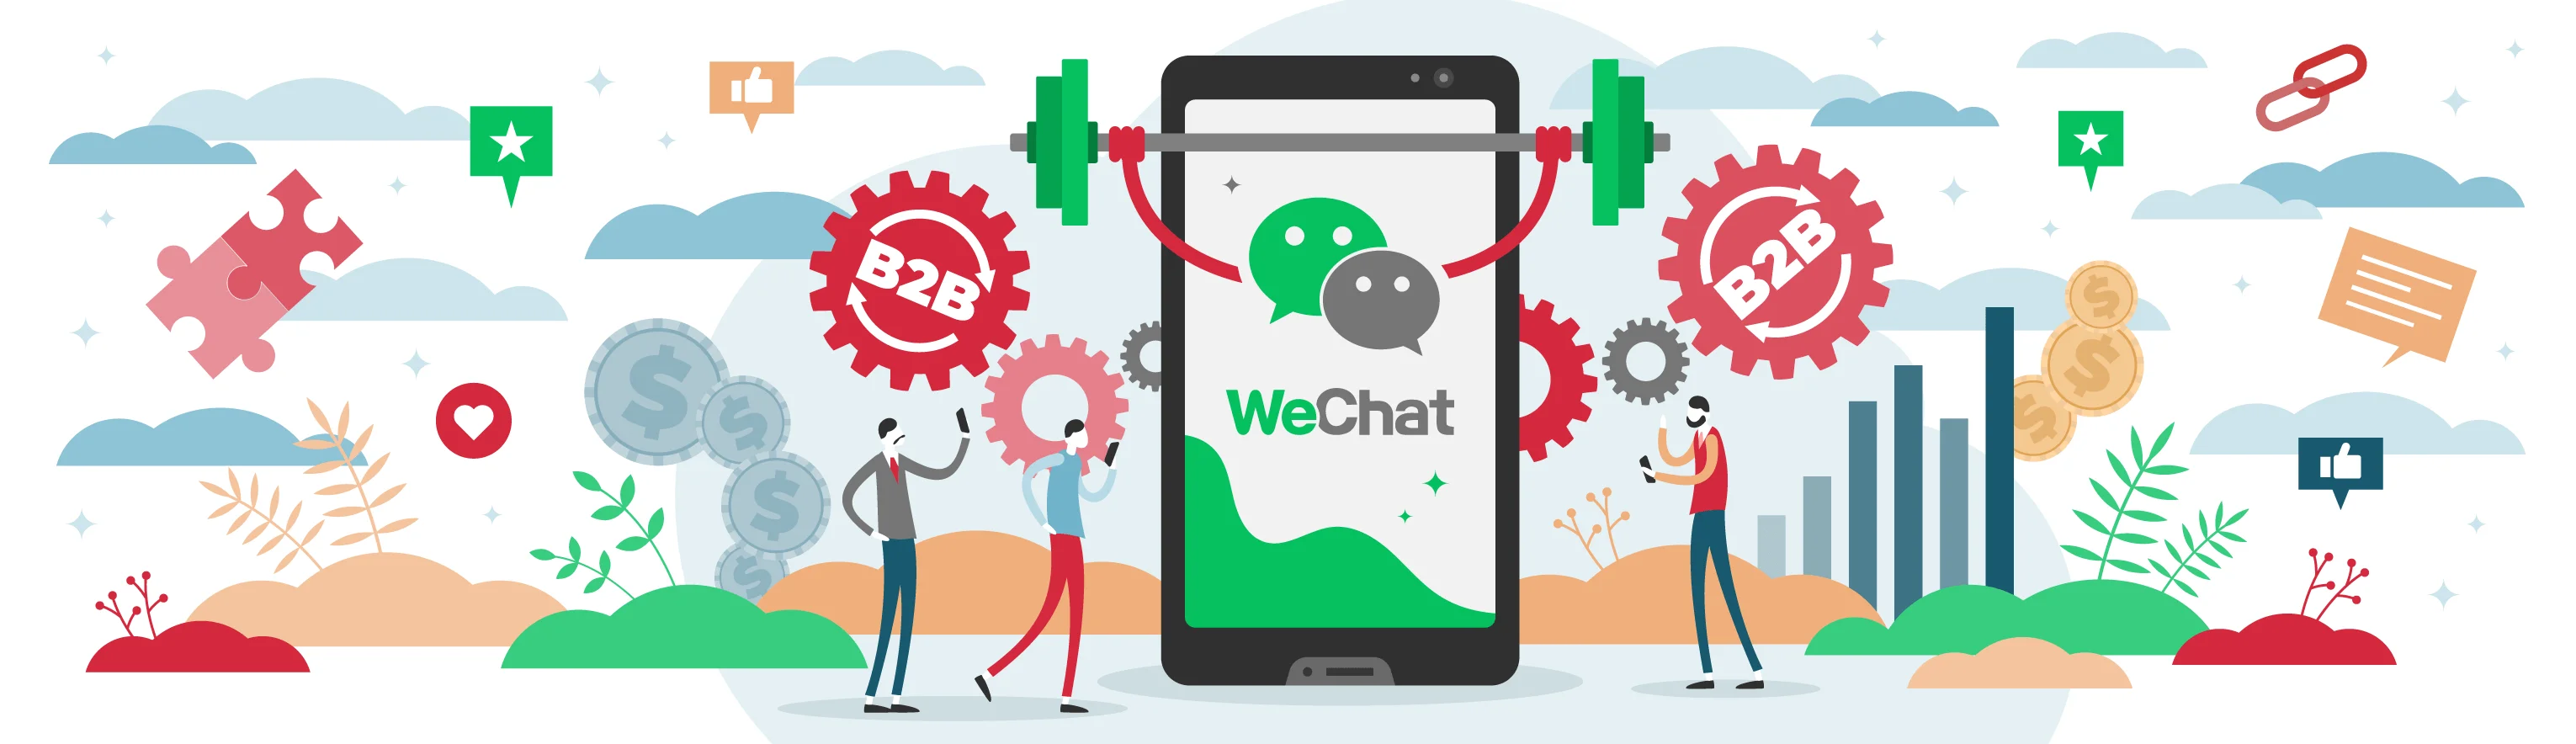 WeChat B2B Marketing: the Super App for your business